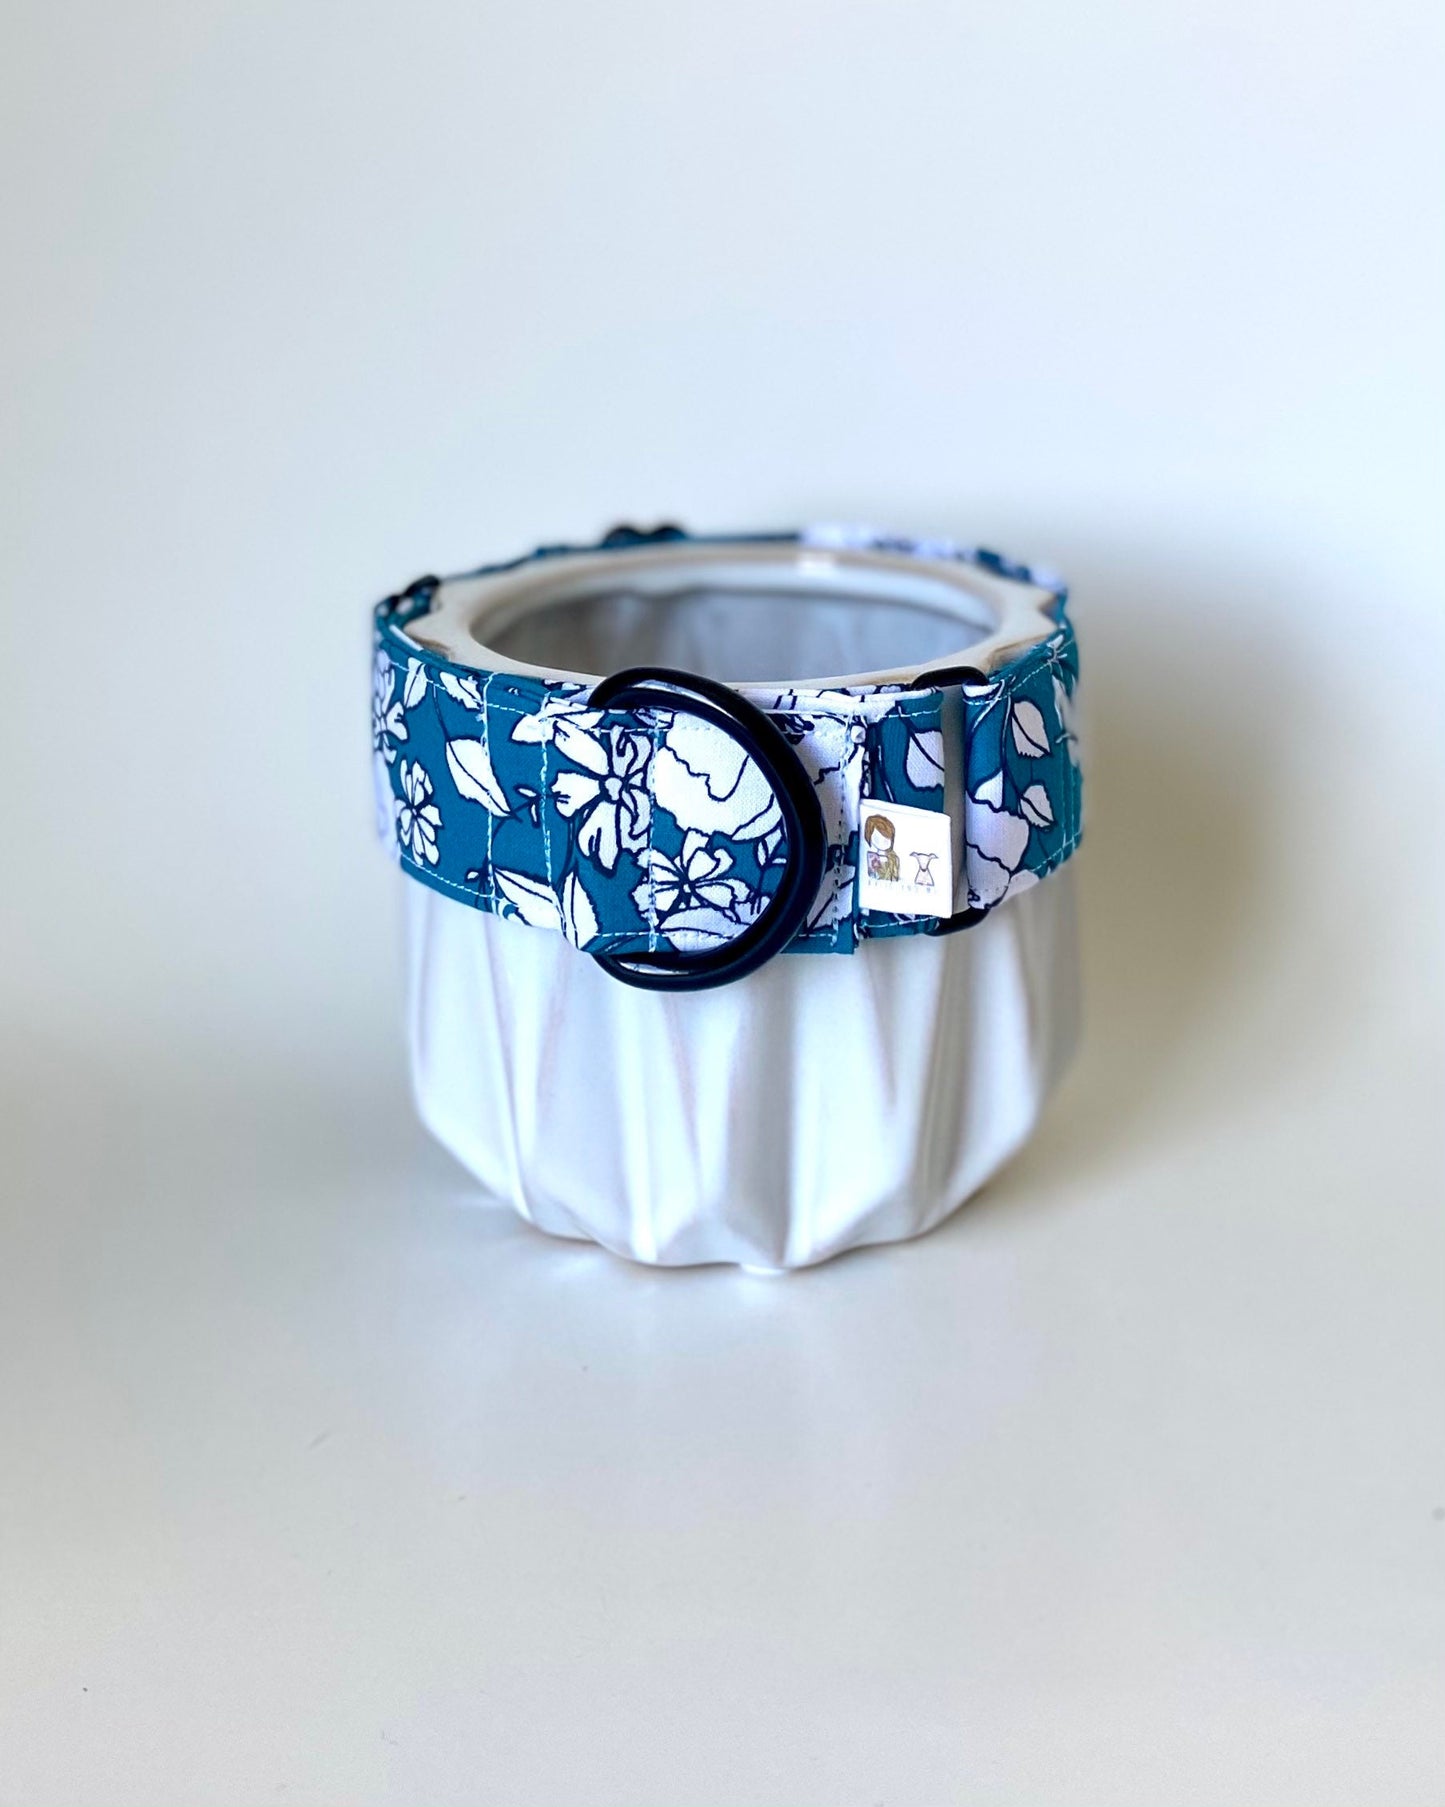 Martingale Collar | Teal Floral